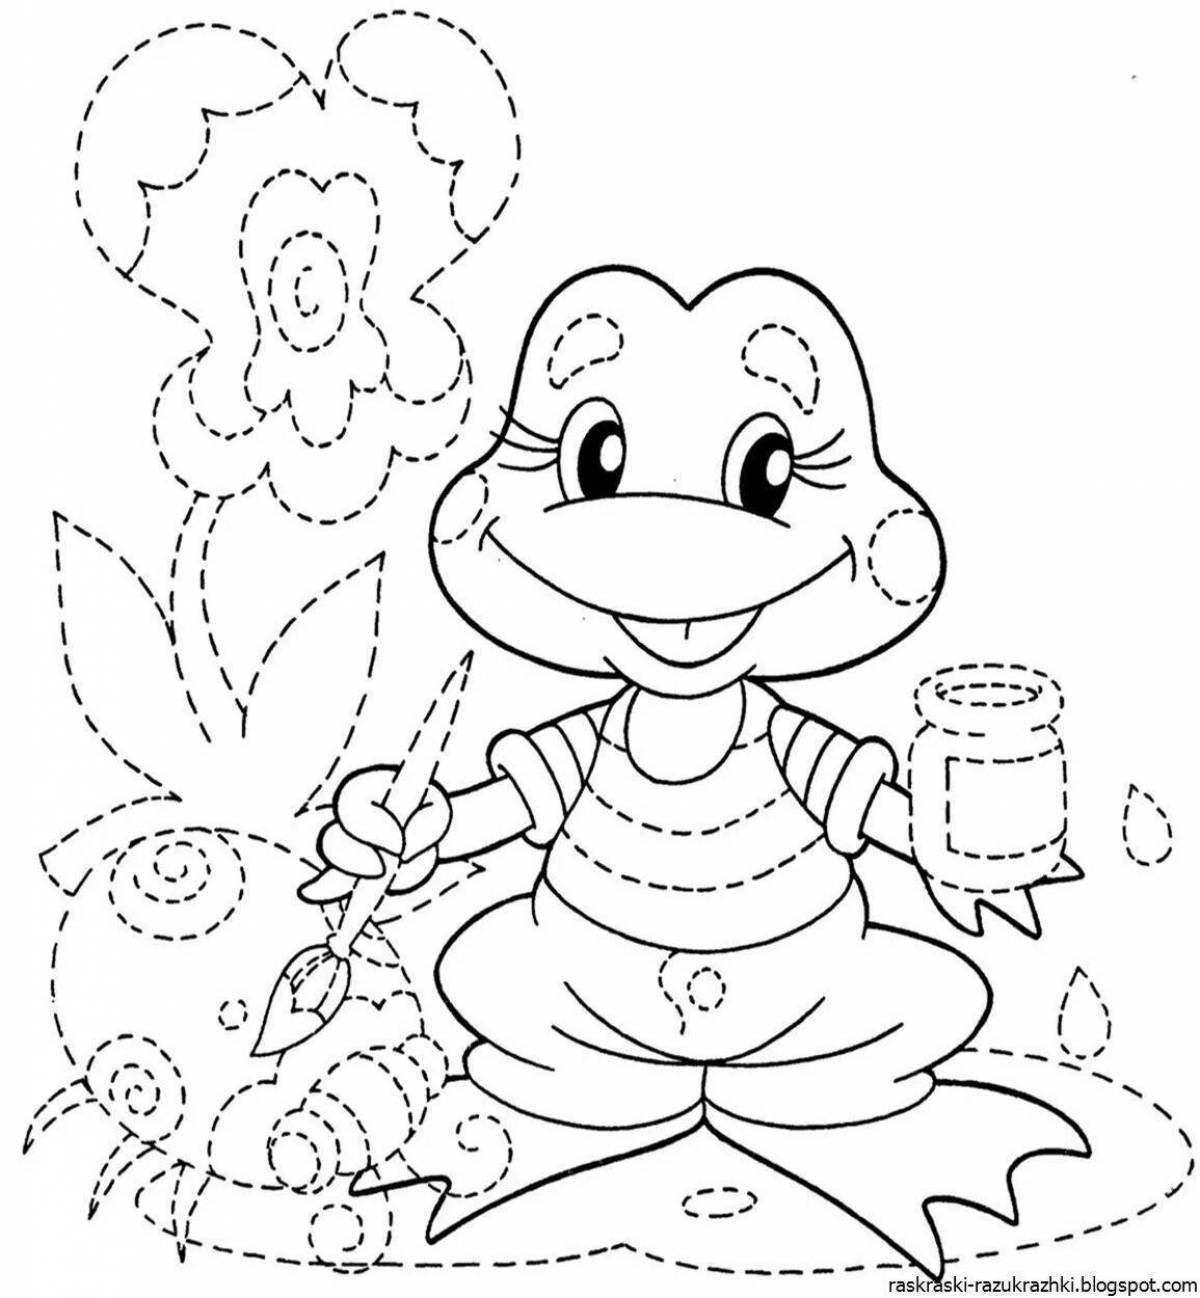 Charming coloring book kindergarten for 5 years